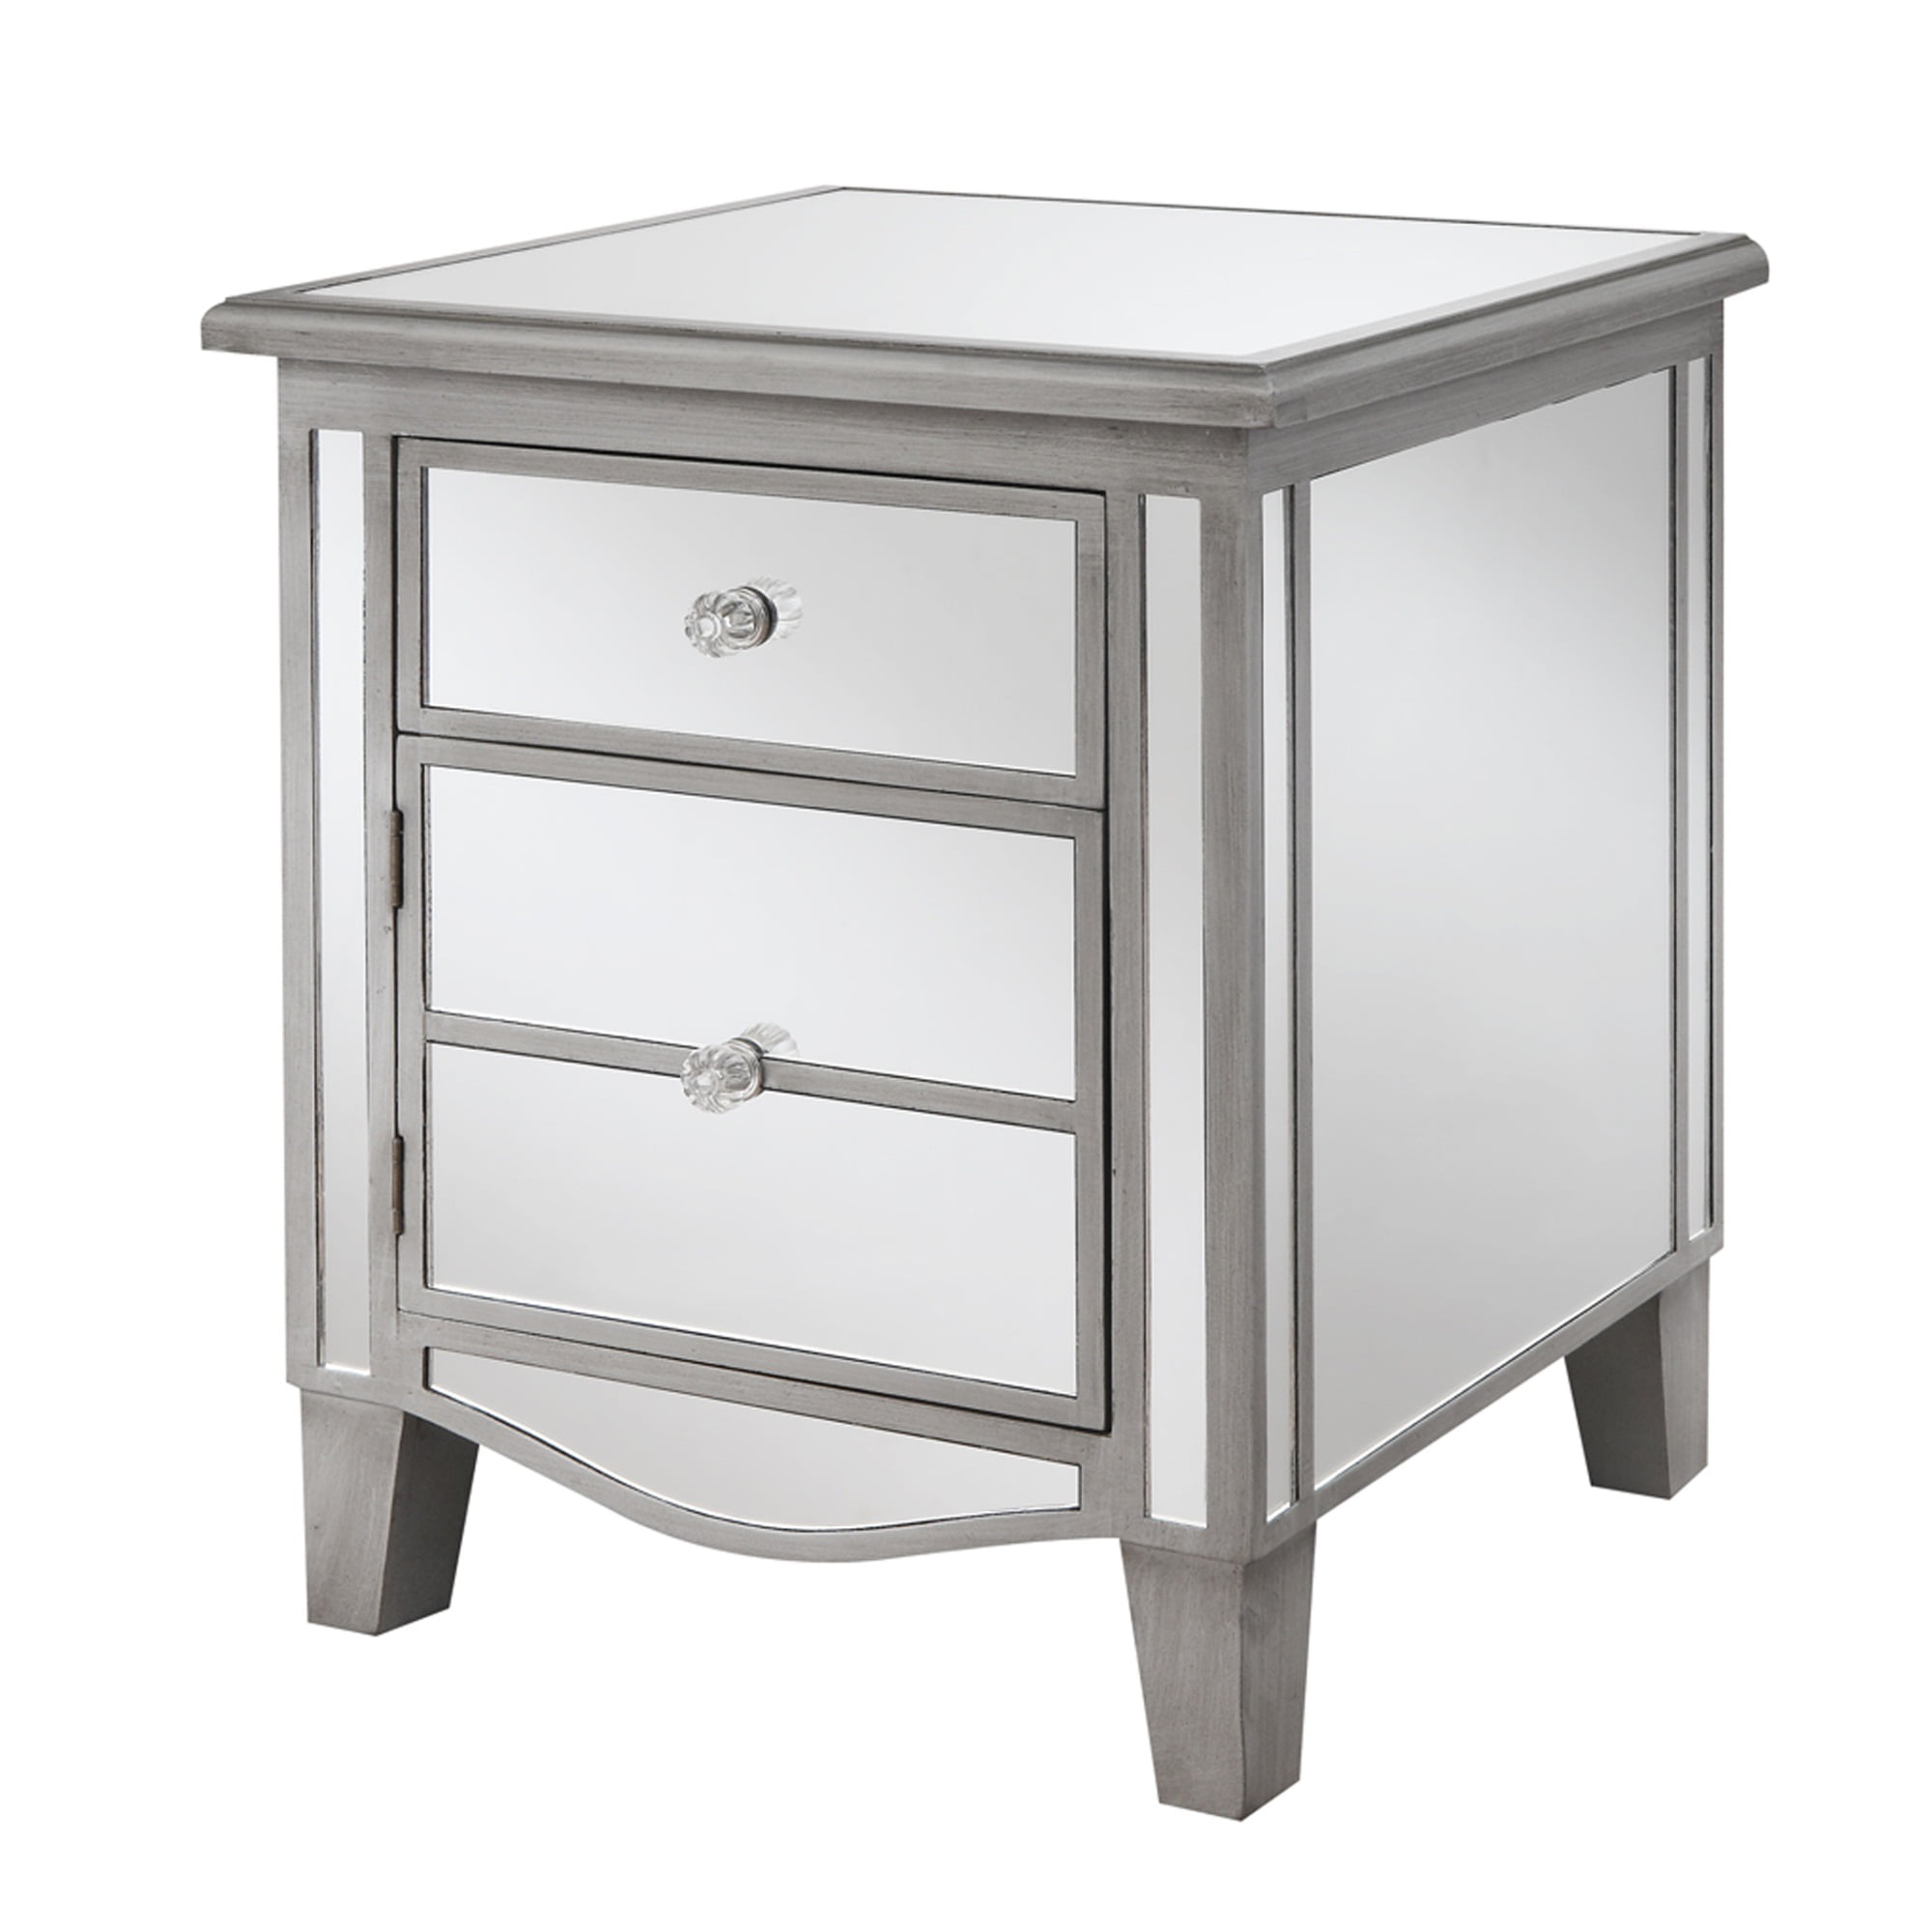 Convenience Concepts Gold Coast Vineyard 3-drawer Mirrored End Table for sale online 